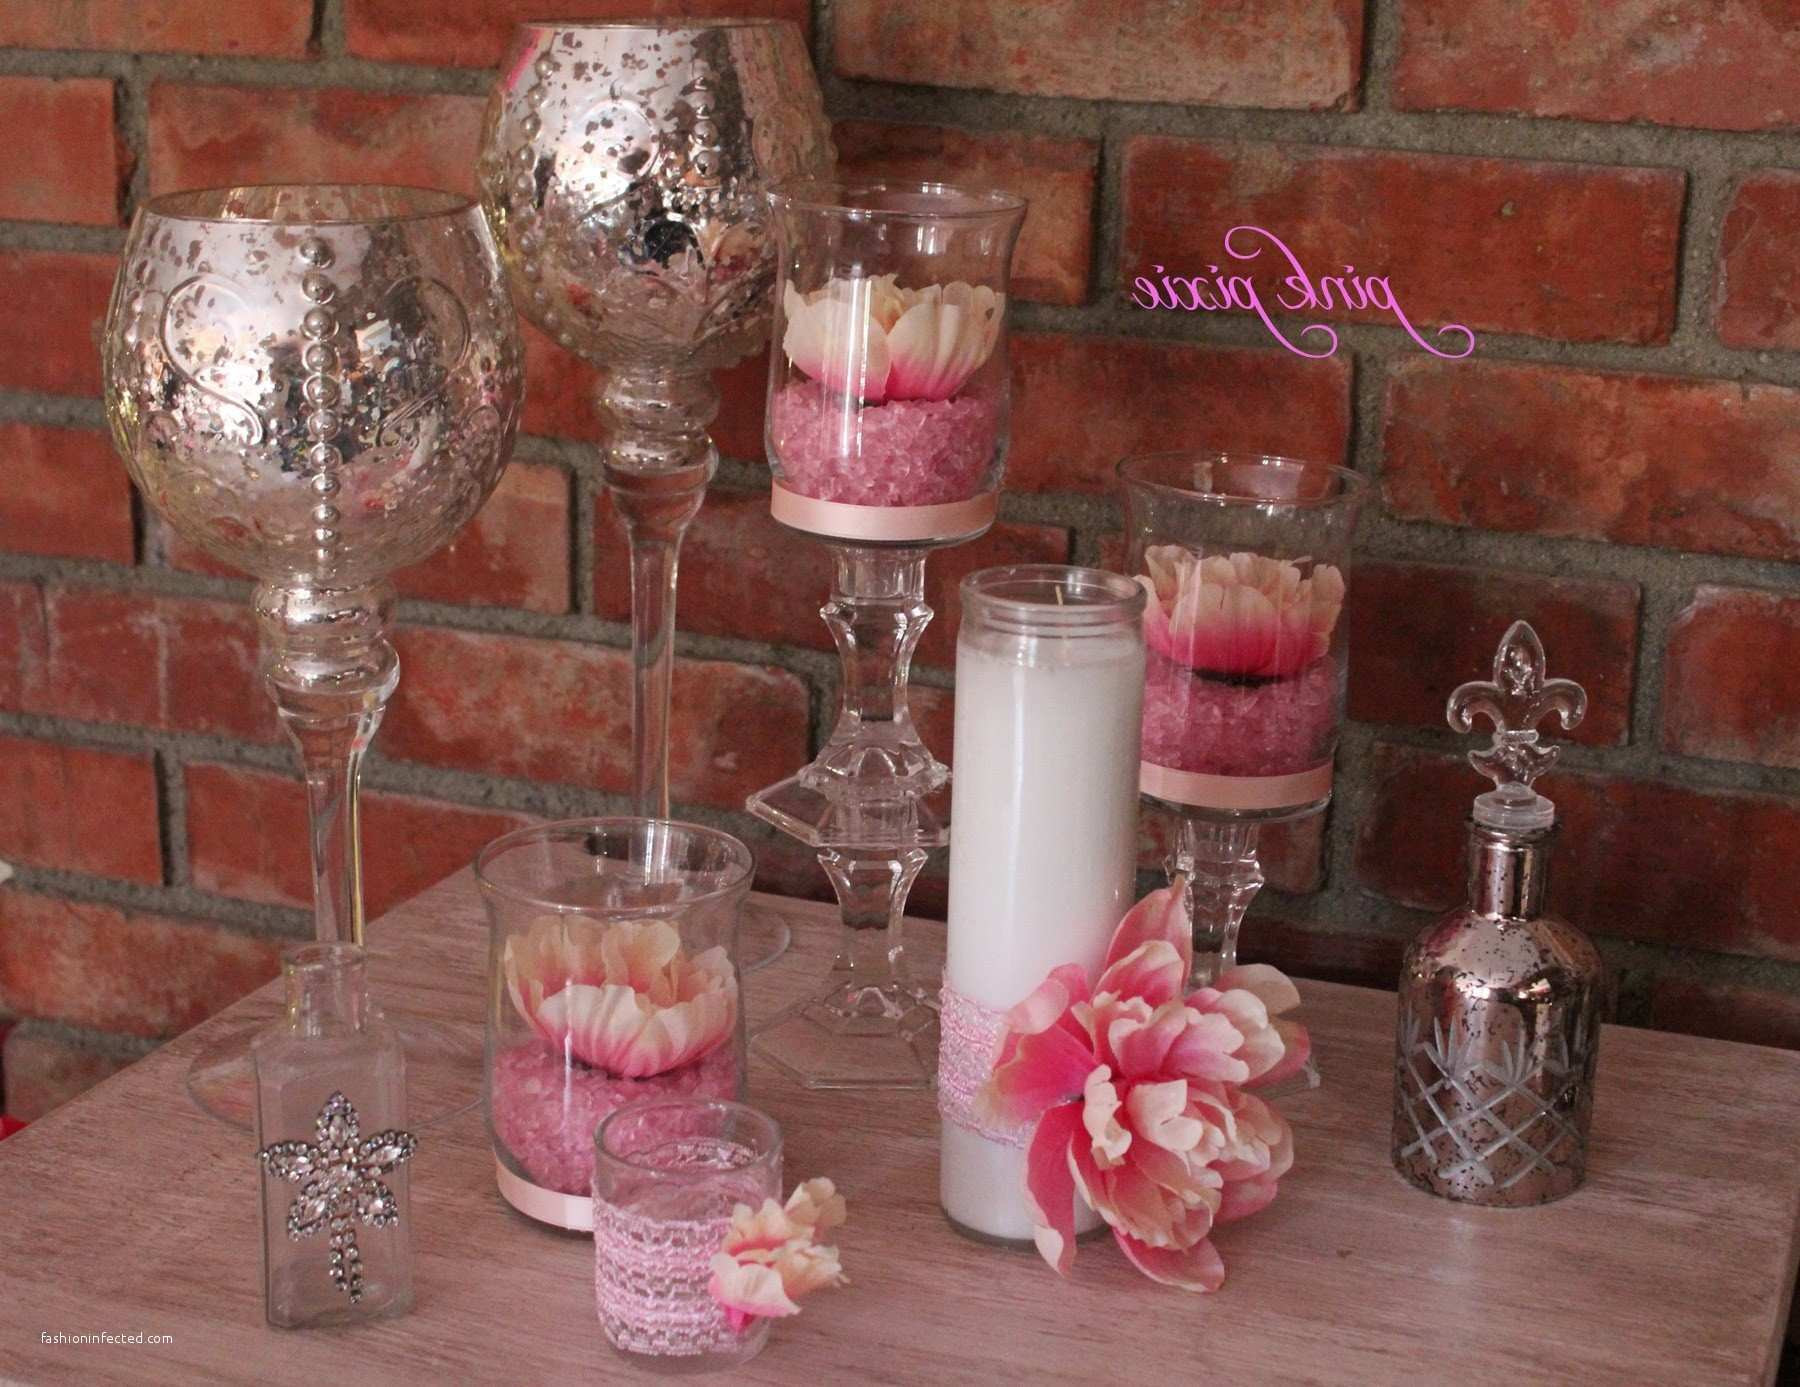 30 Famous Glass Vases for Weddings 2024 free download glass vases for weddings of traditional wedding tree decorating ideas of dollar tree wedding intended for traditional wedding tree decorating ideas of dollar tree wedding decorations awesome